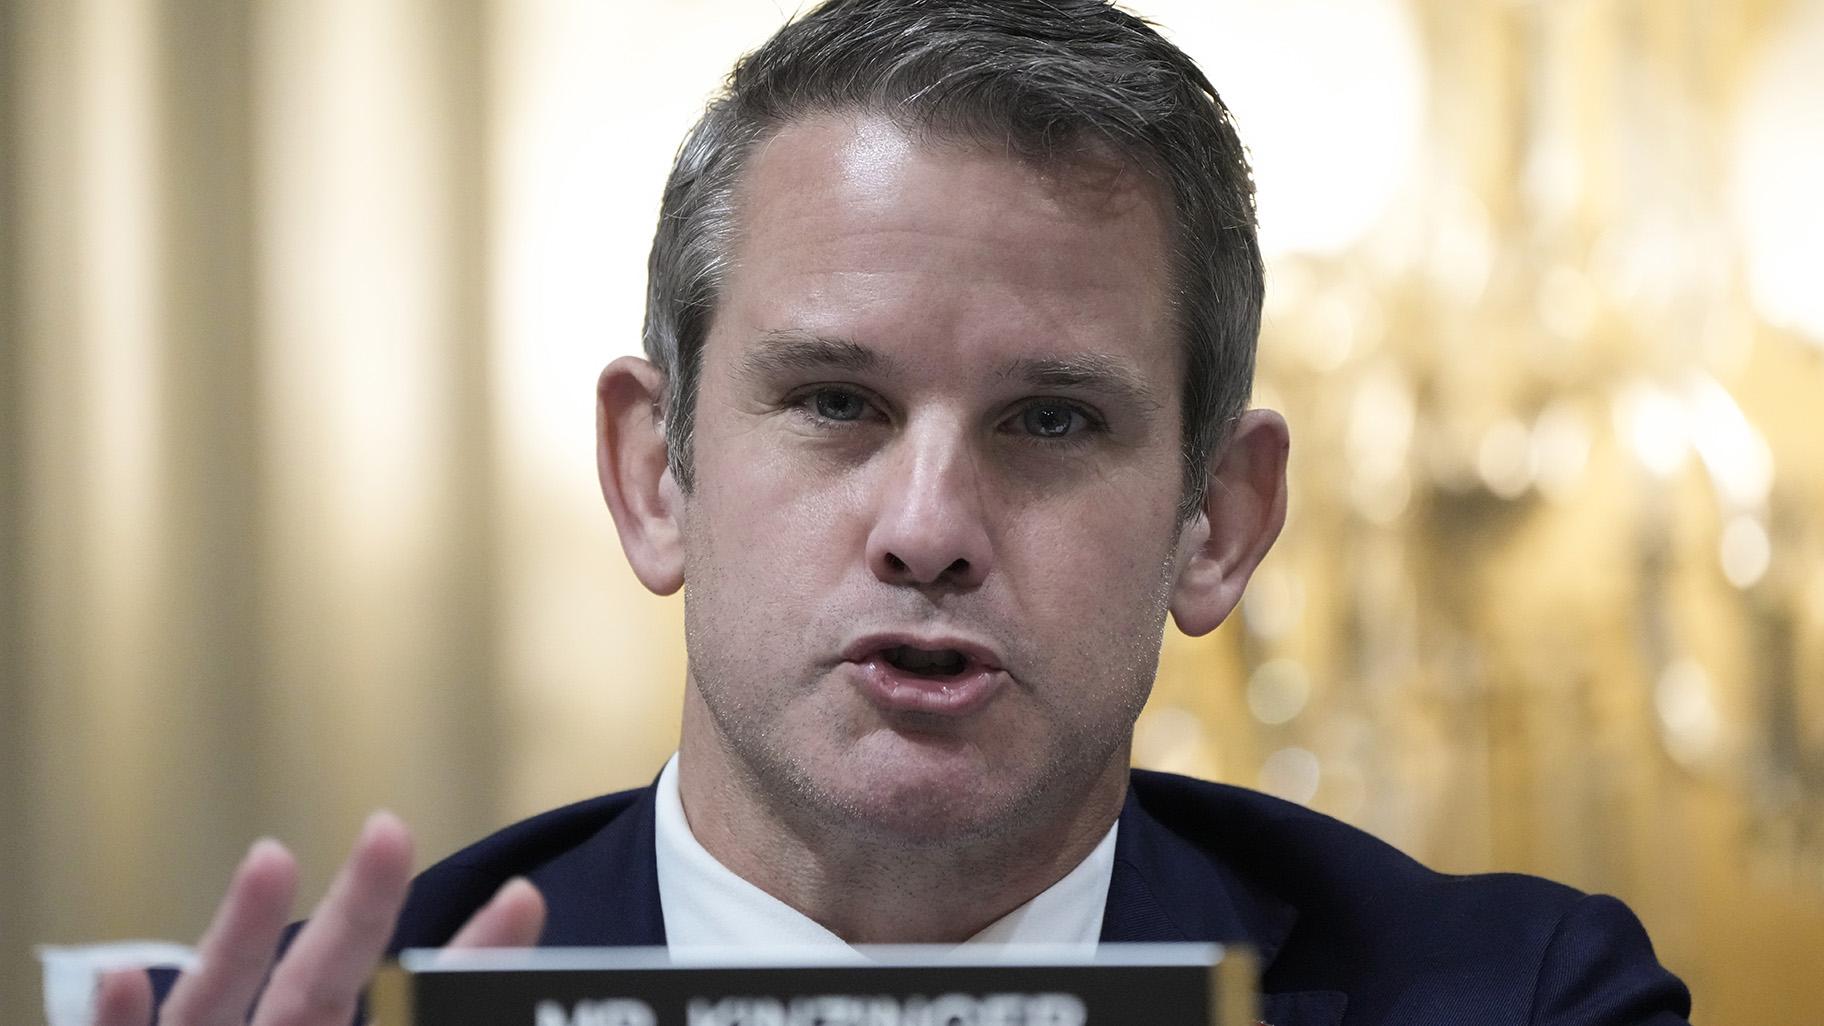 Rep. Adam Kinzinger, R-Ill., speaks as the House select committee investigating the Jan. 6 attack on the U.S. Capitol Hill in Washington on Dec. 19, 2022. (AP Photo / Jacquelyn Martin, File)